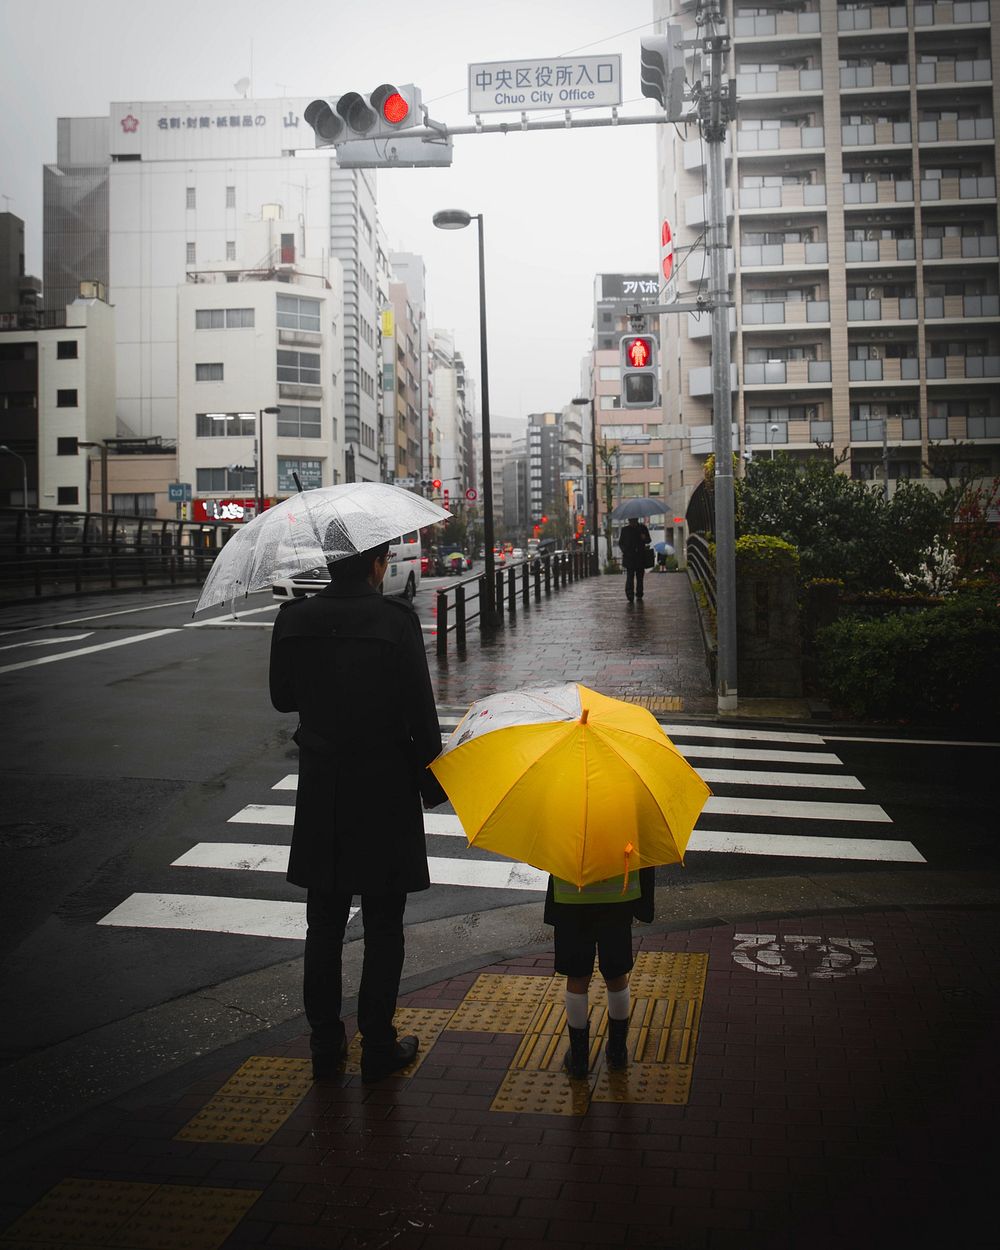 Father and son in a rainy Tokyo